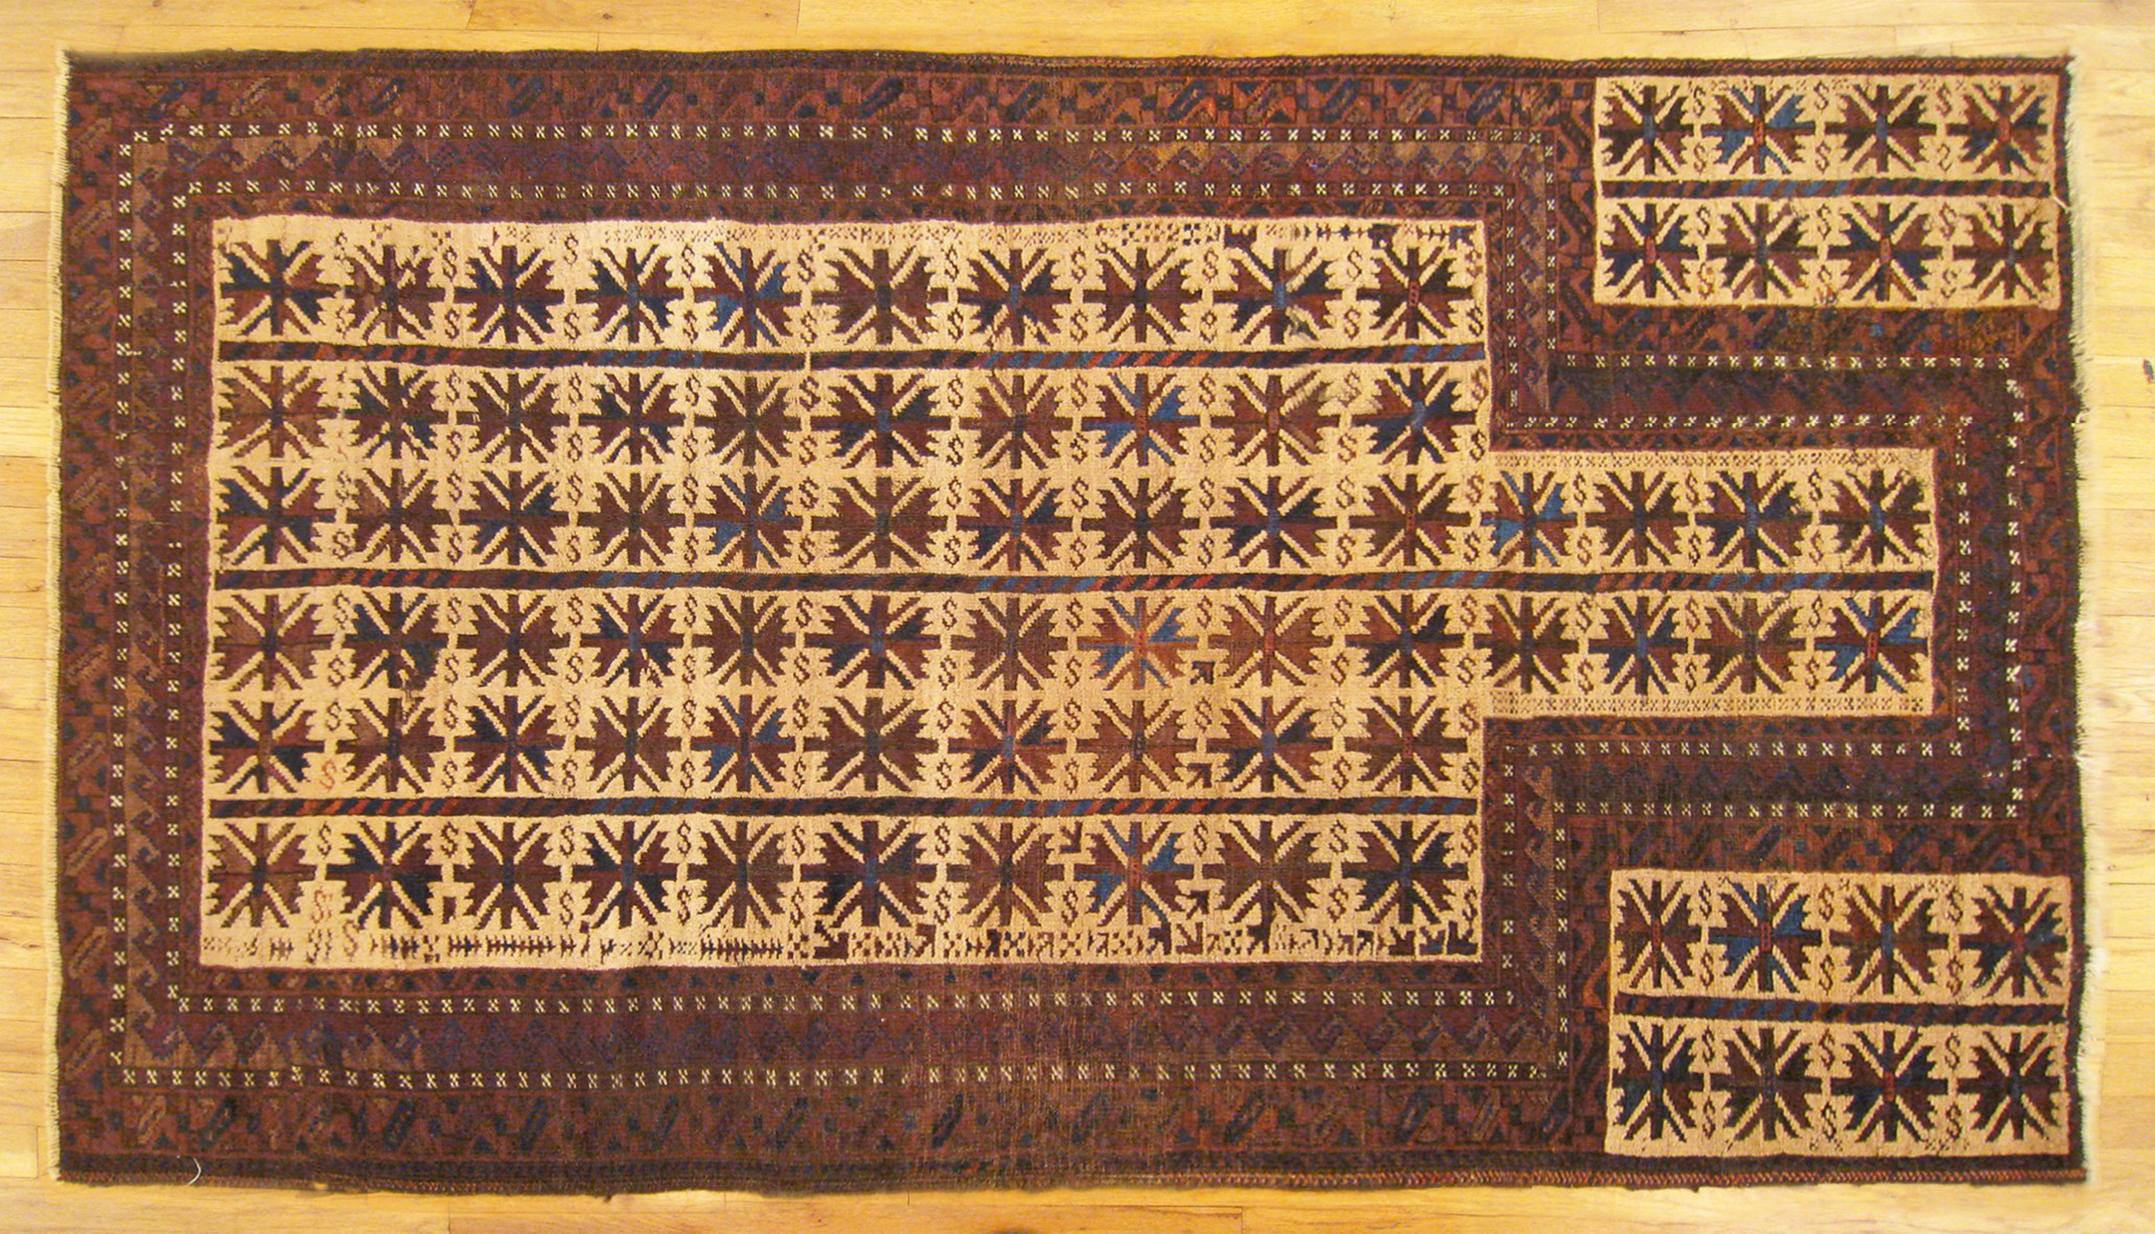 Antique Persian Belouch rug, Small size, circa 1920

A one-of-a-kind antique Persian Belouch Oriental Carpet, hand-knotted. This small rug features a prayer design in a directional position on an ivory central field. This field is enclosed within